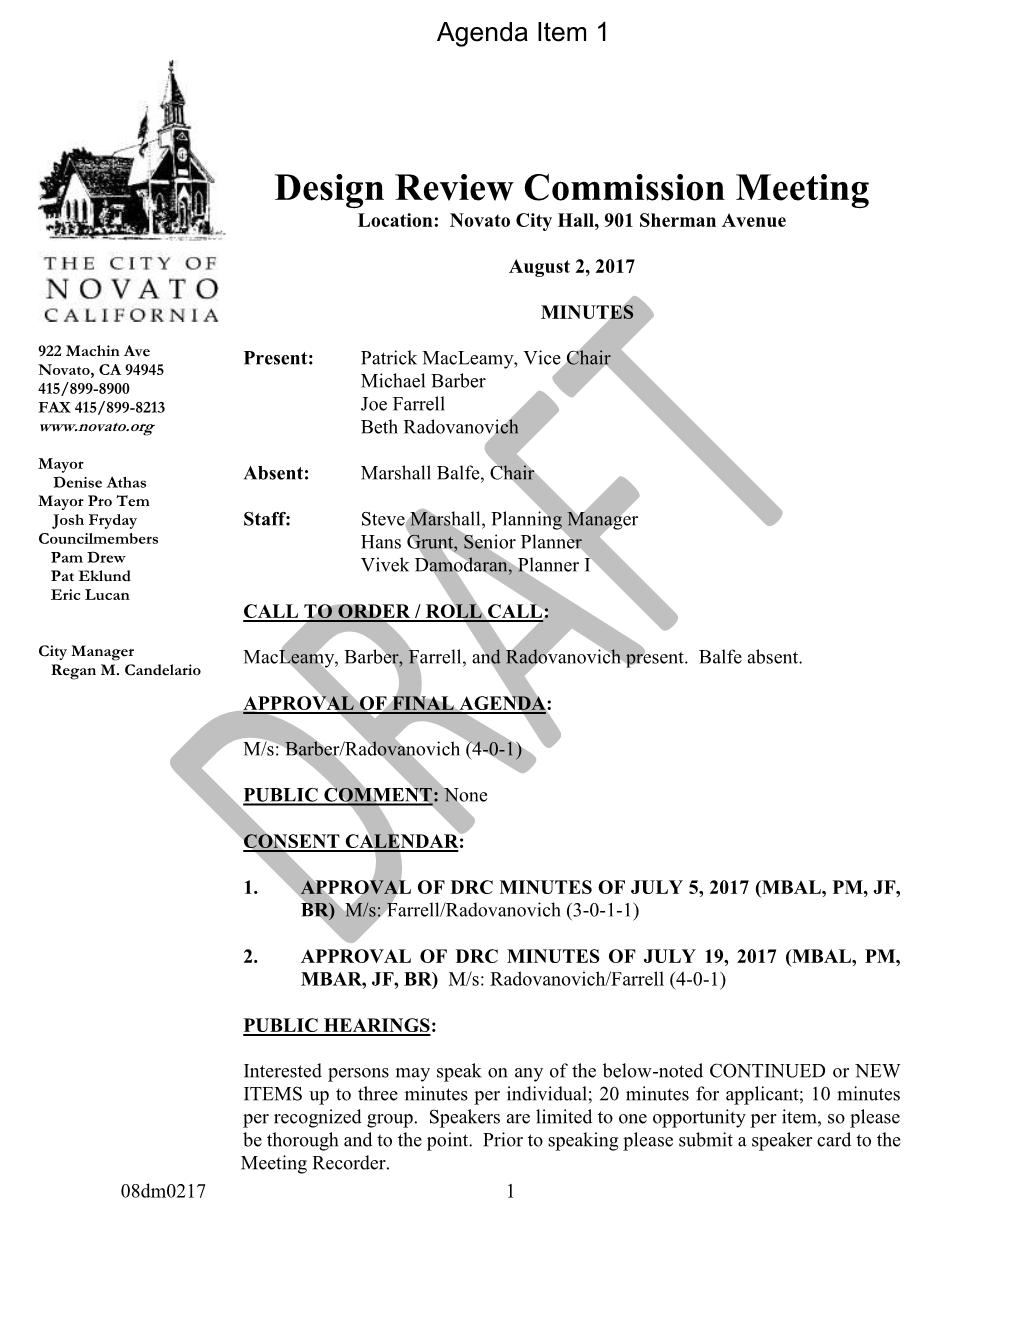 Design Review Commission Meeting Location: Novato City Hall, 901 Sherman Avenue